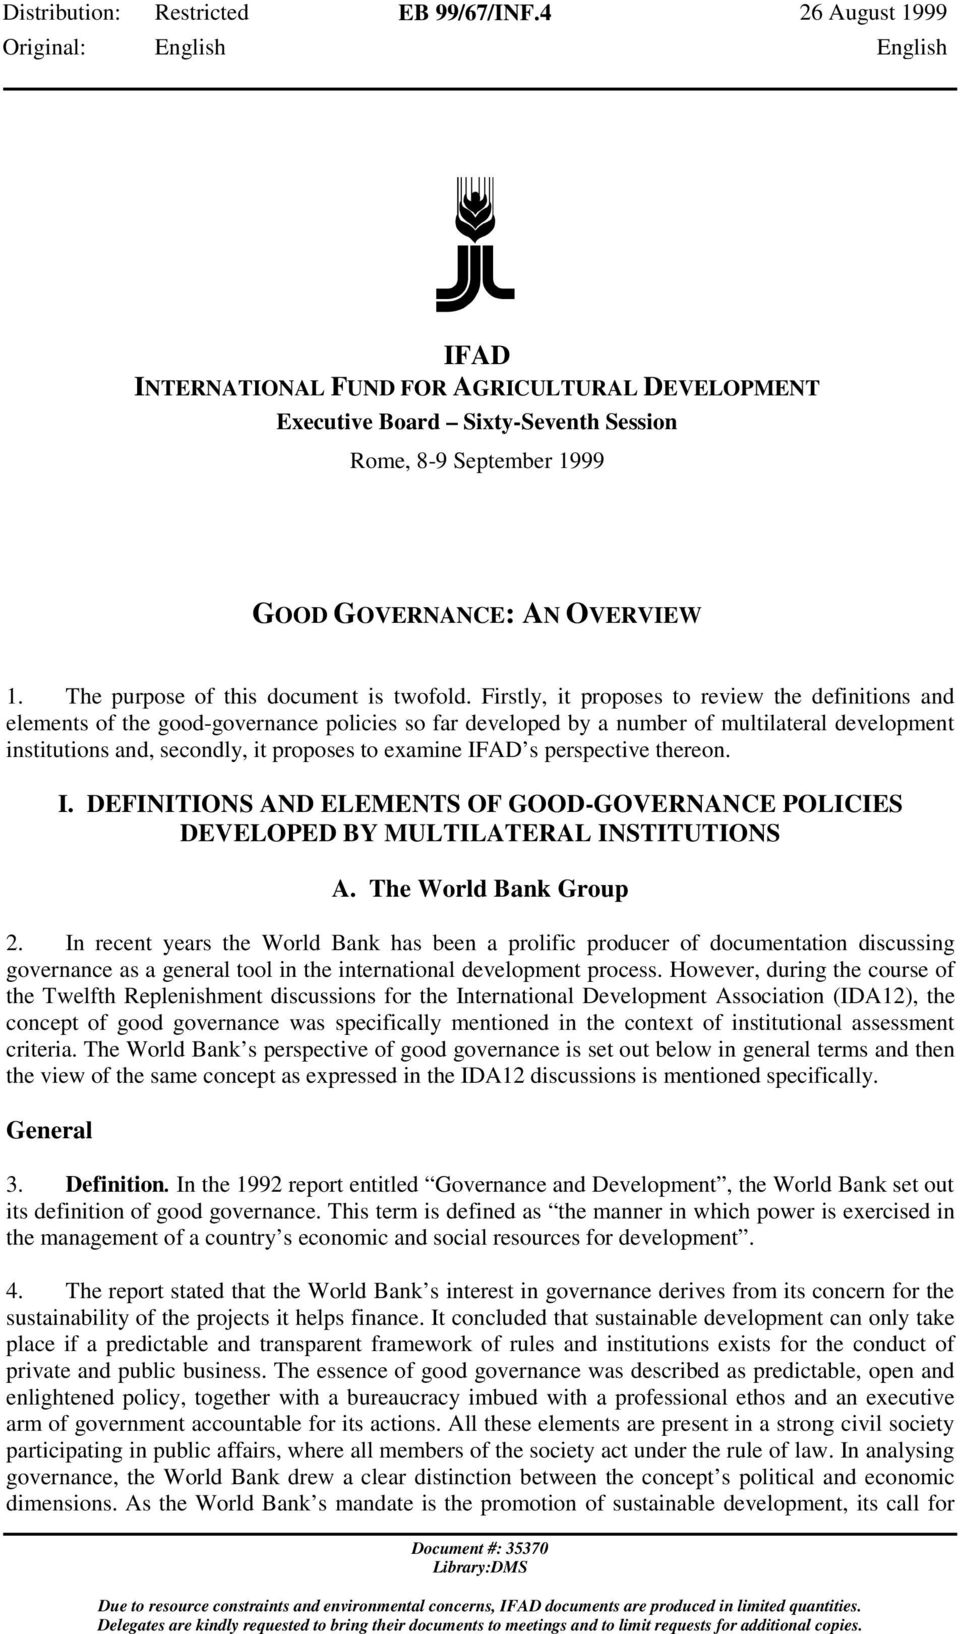 Firstly, it proposes to review the definitions and elements of the good-governance policies so far developed by a number of multilateral development institutions and, secondly, it proposes to examine